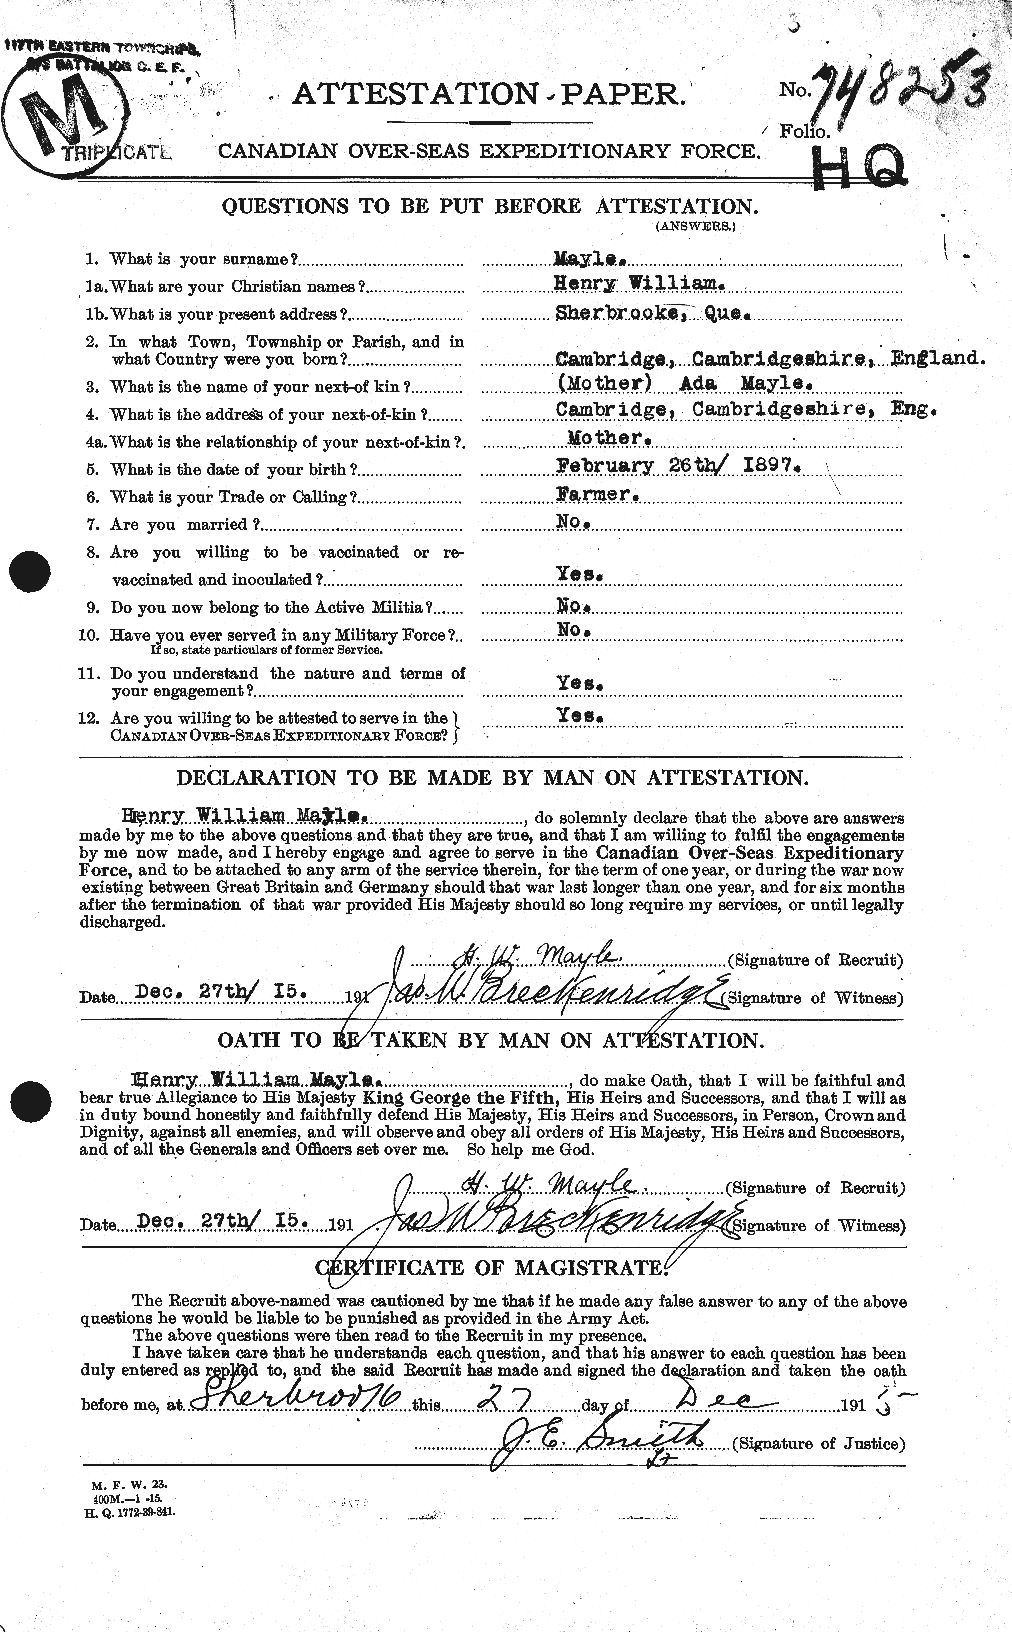 Personnel Records of the First World War - CEF 486595a